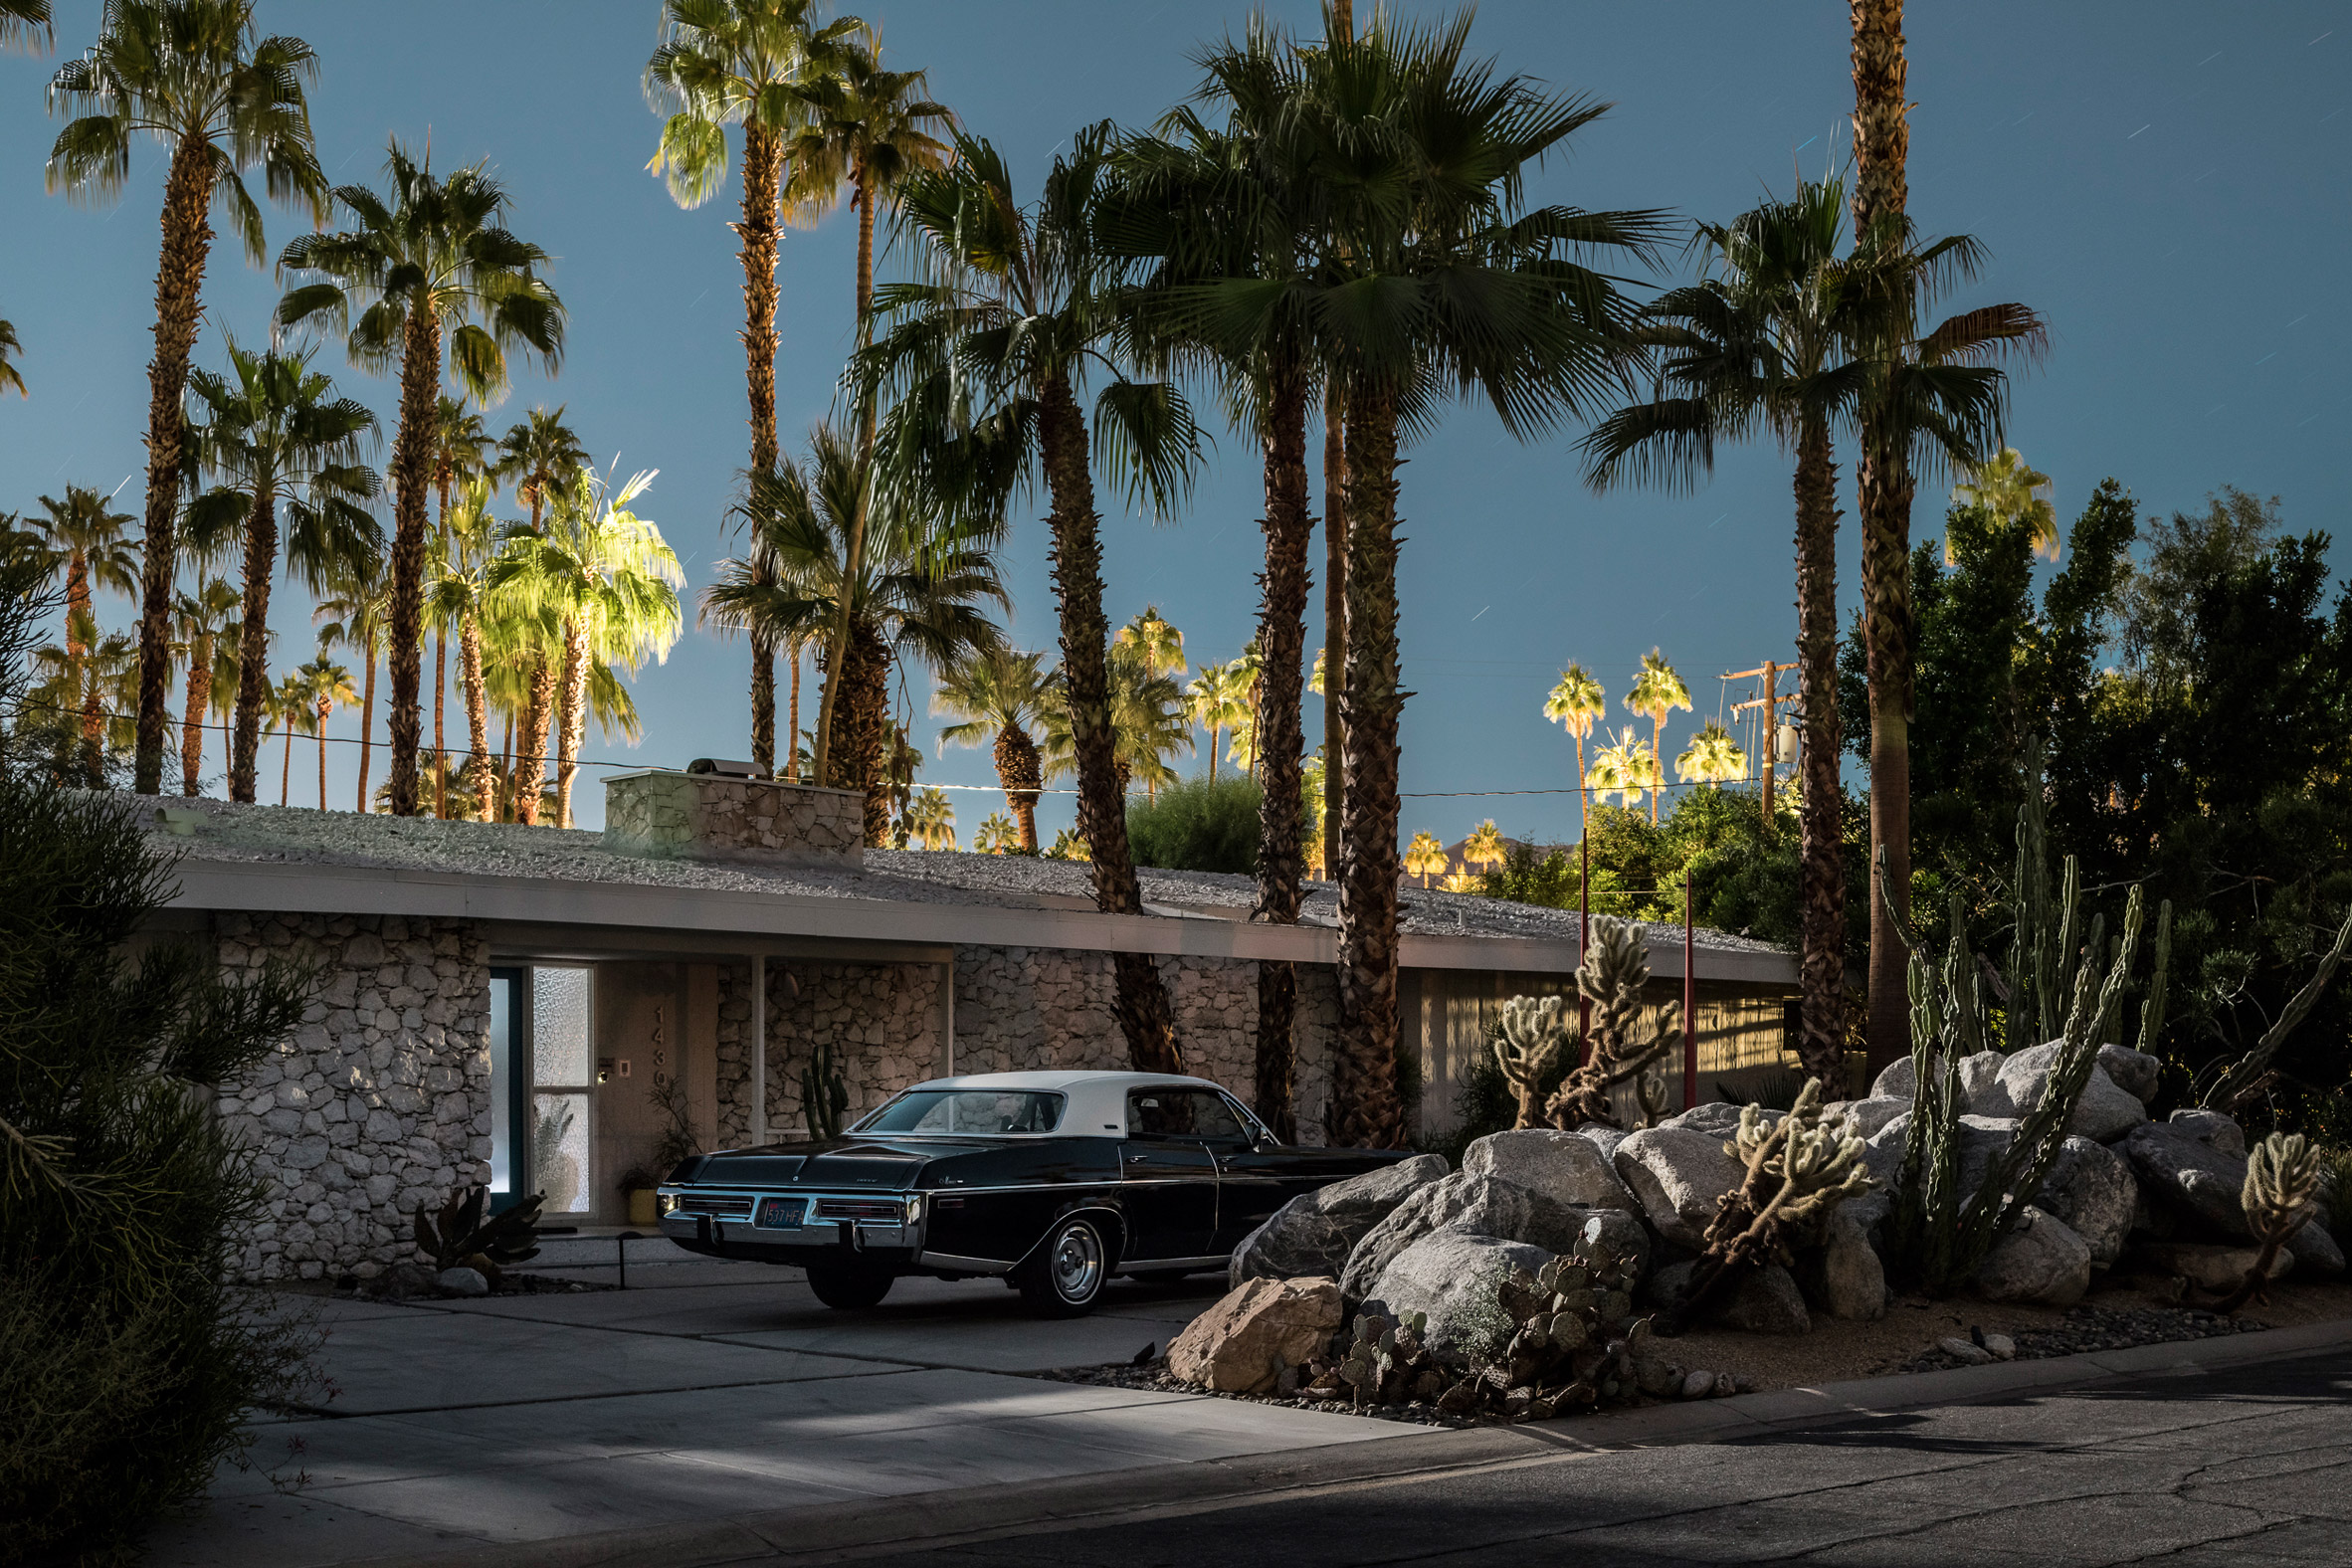 Modernist house in Palm Springs, photographed by Tom Blachford